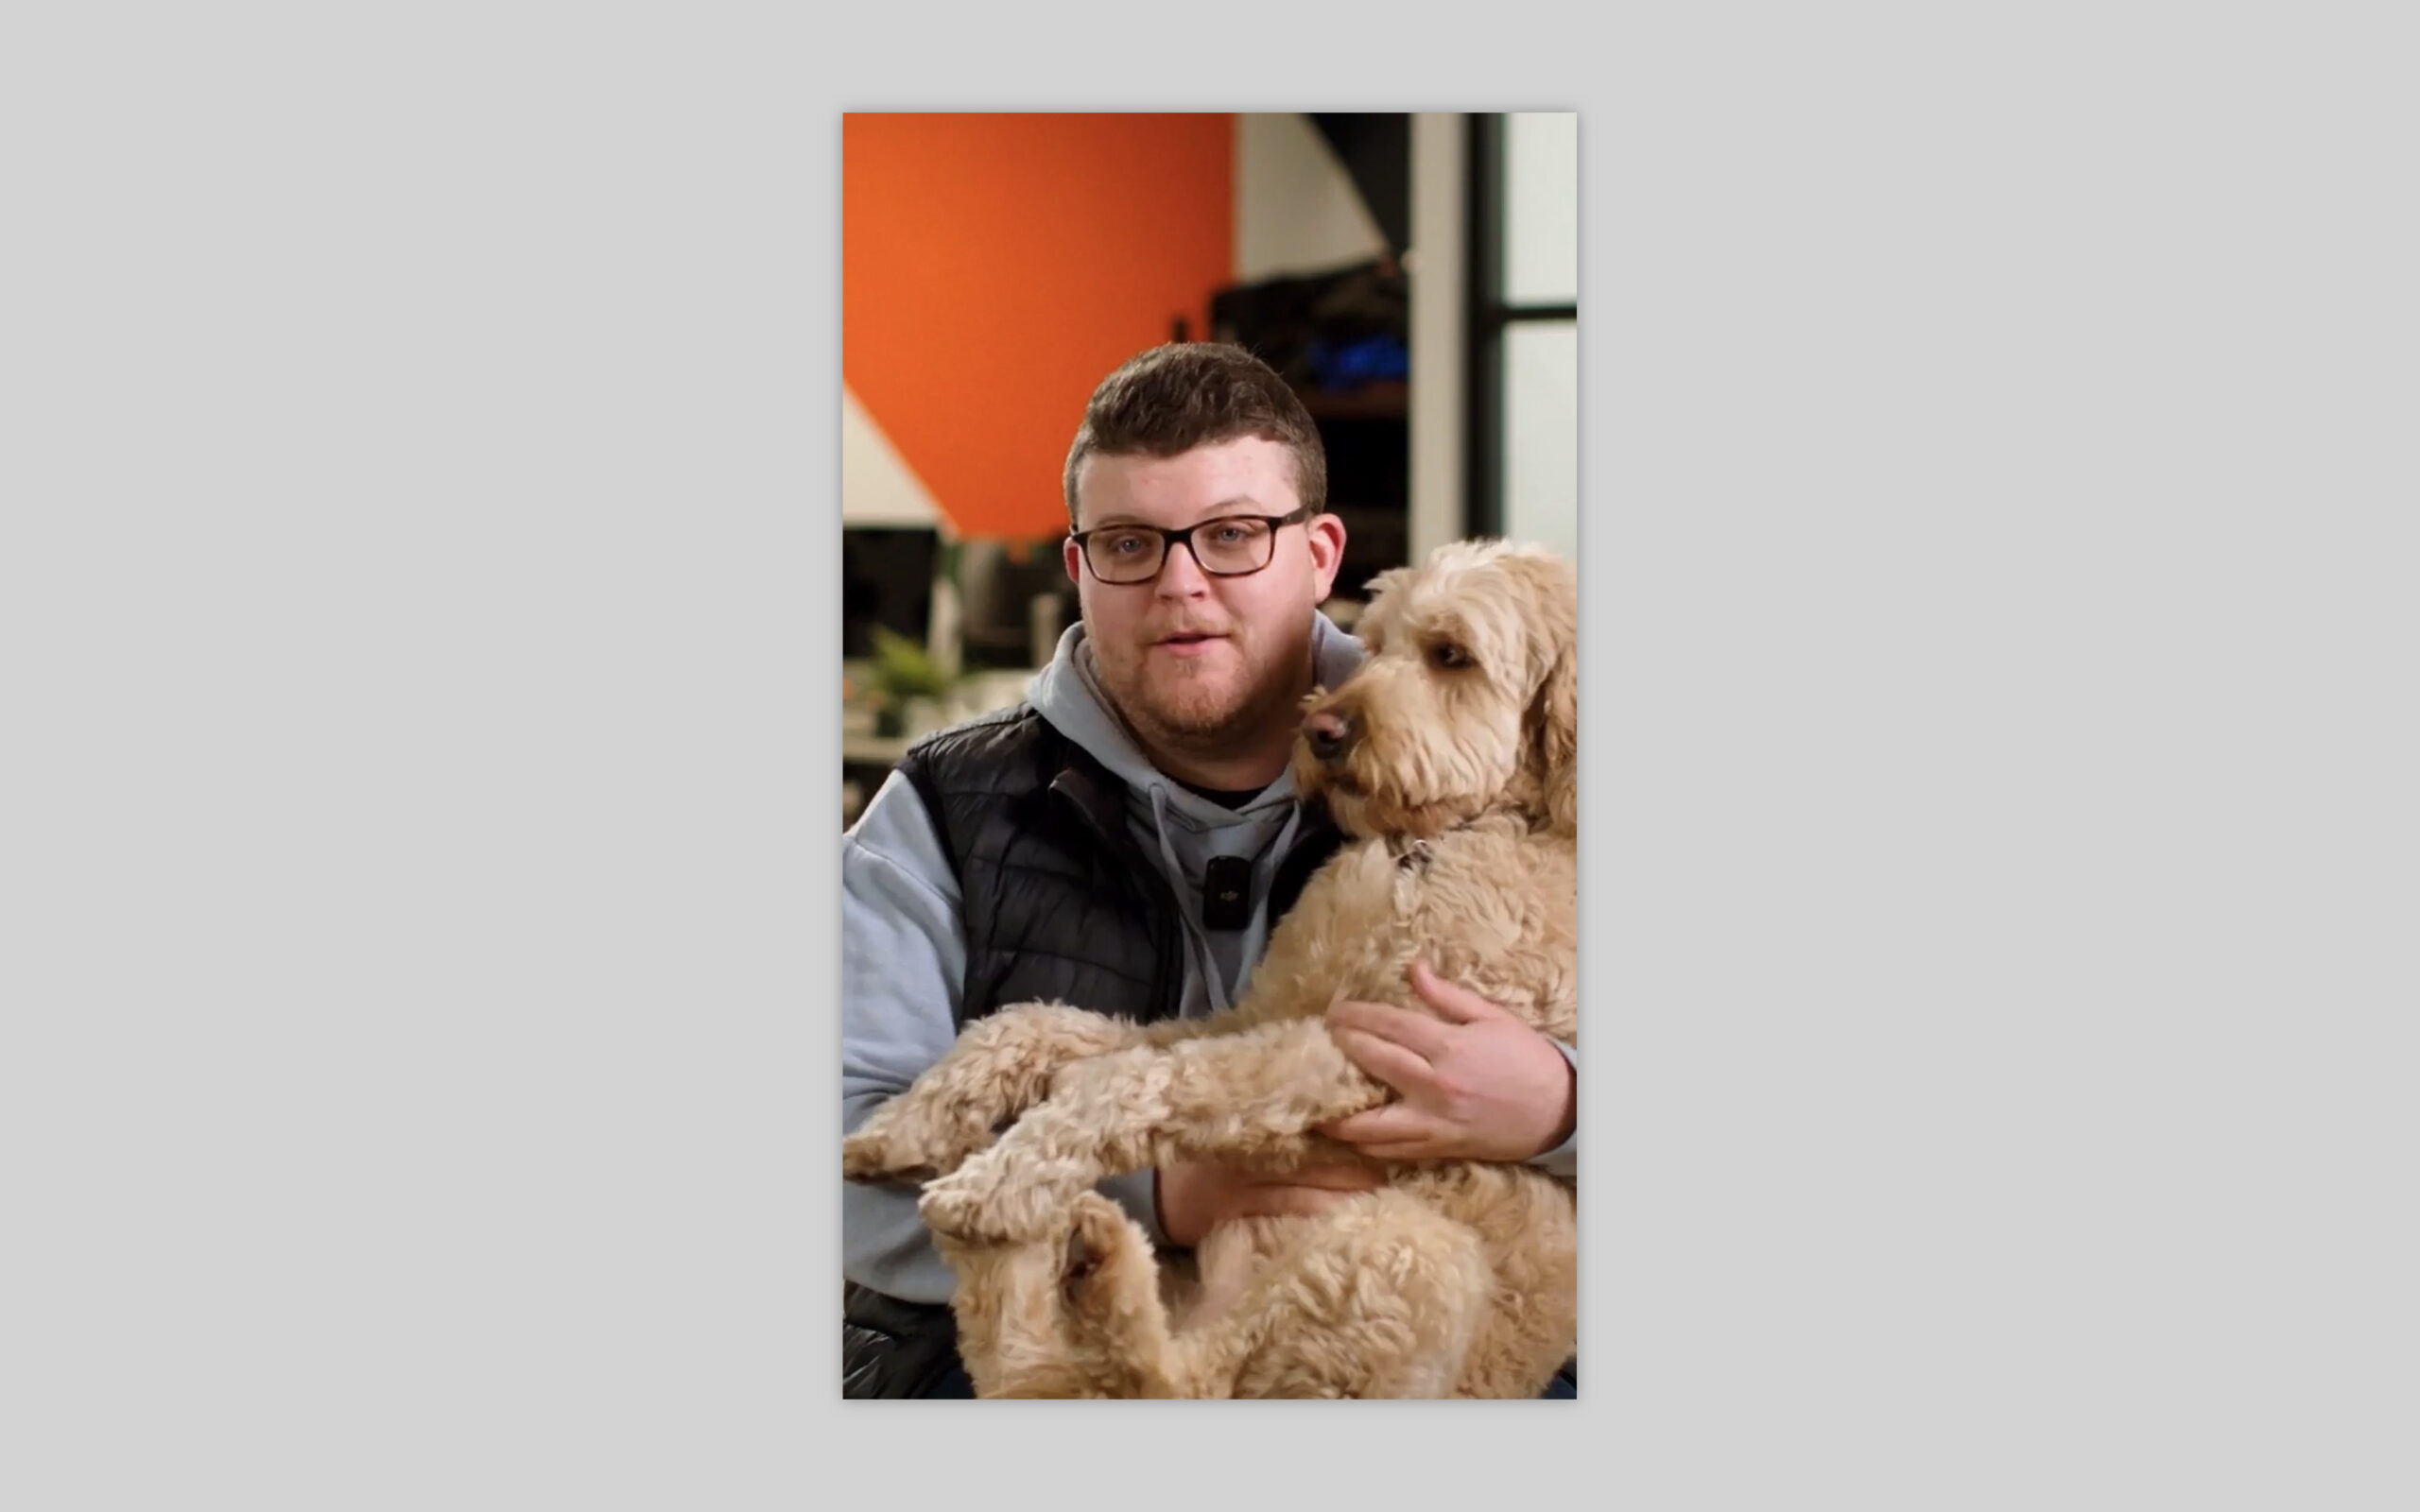 A screenshot from our shoot of Brandon with his dog in his lap.